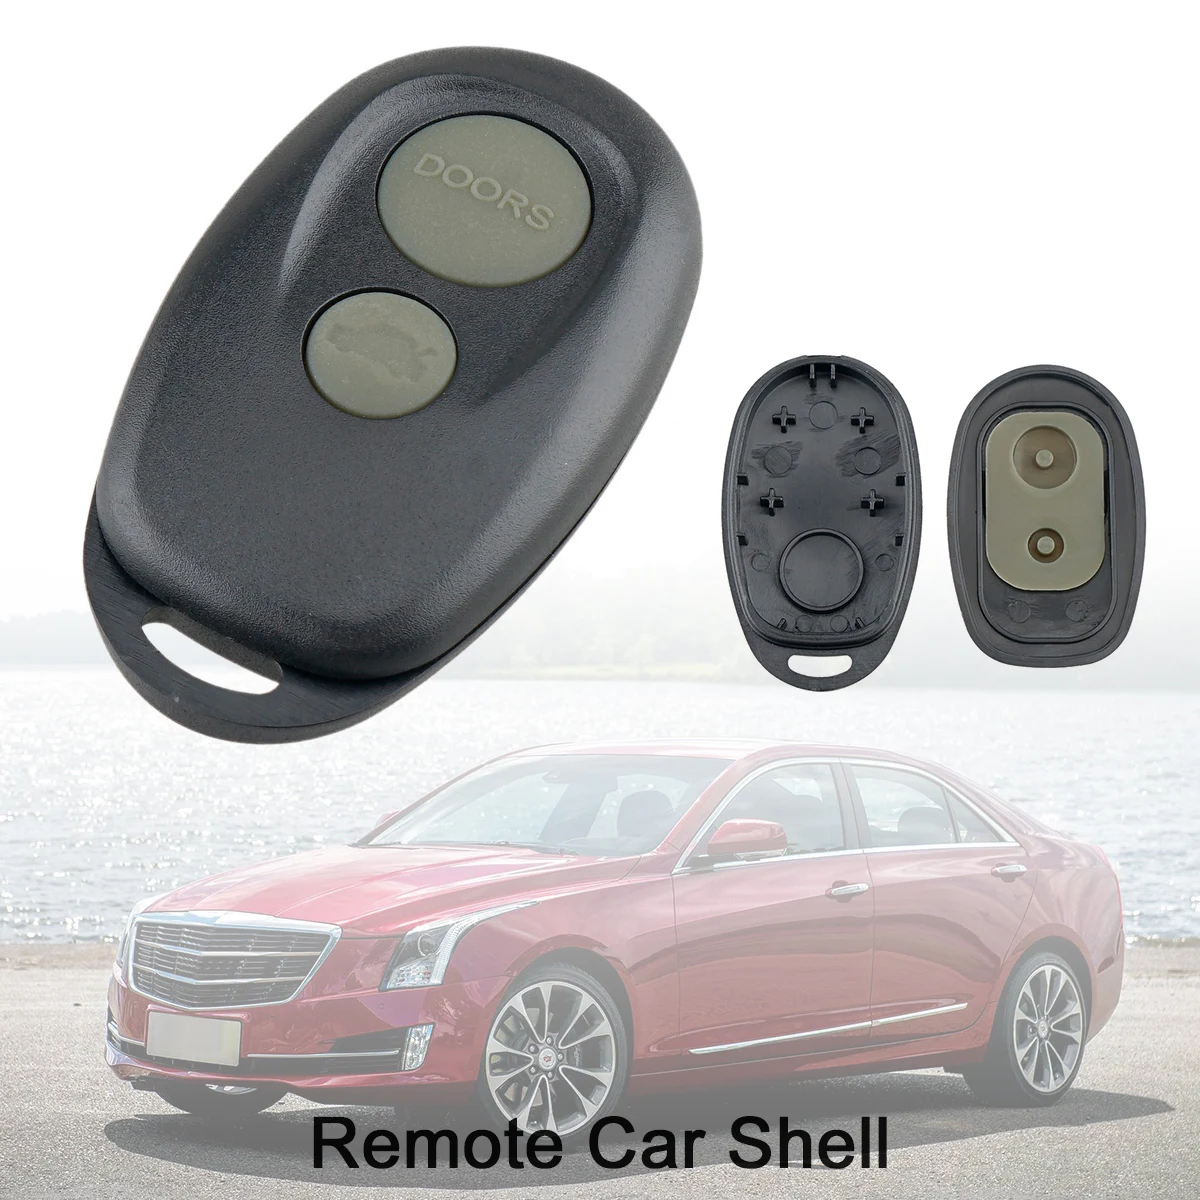 

2 Buttons High Quality New Remote Key Shell Case Fob Fit for Toyota Camry Avalon Conquest Car Remote Key Shell